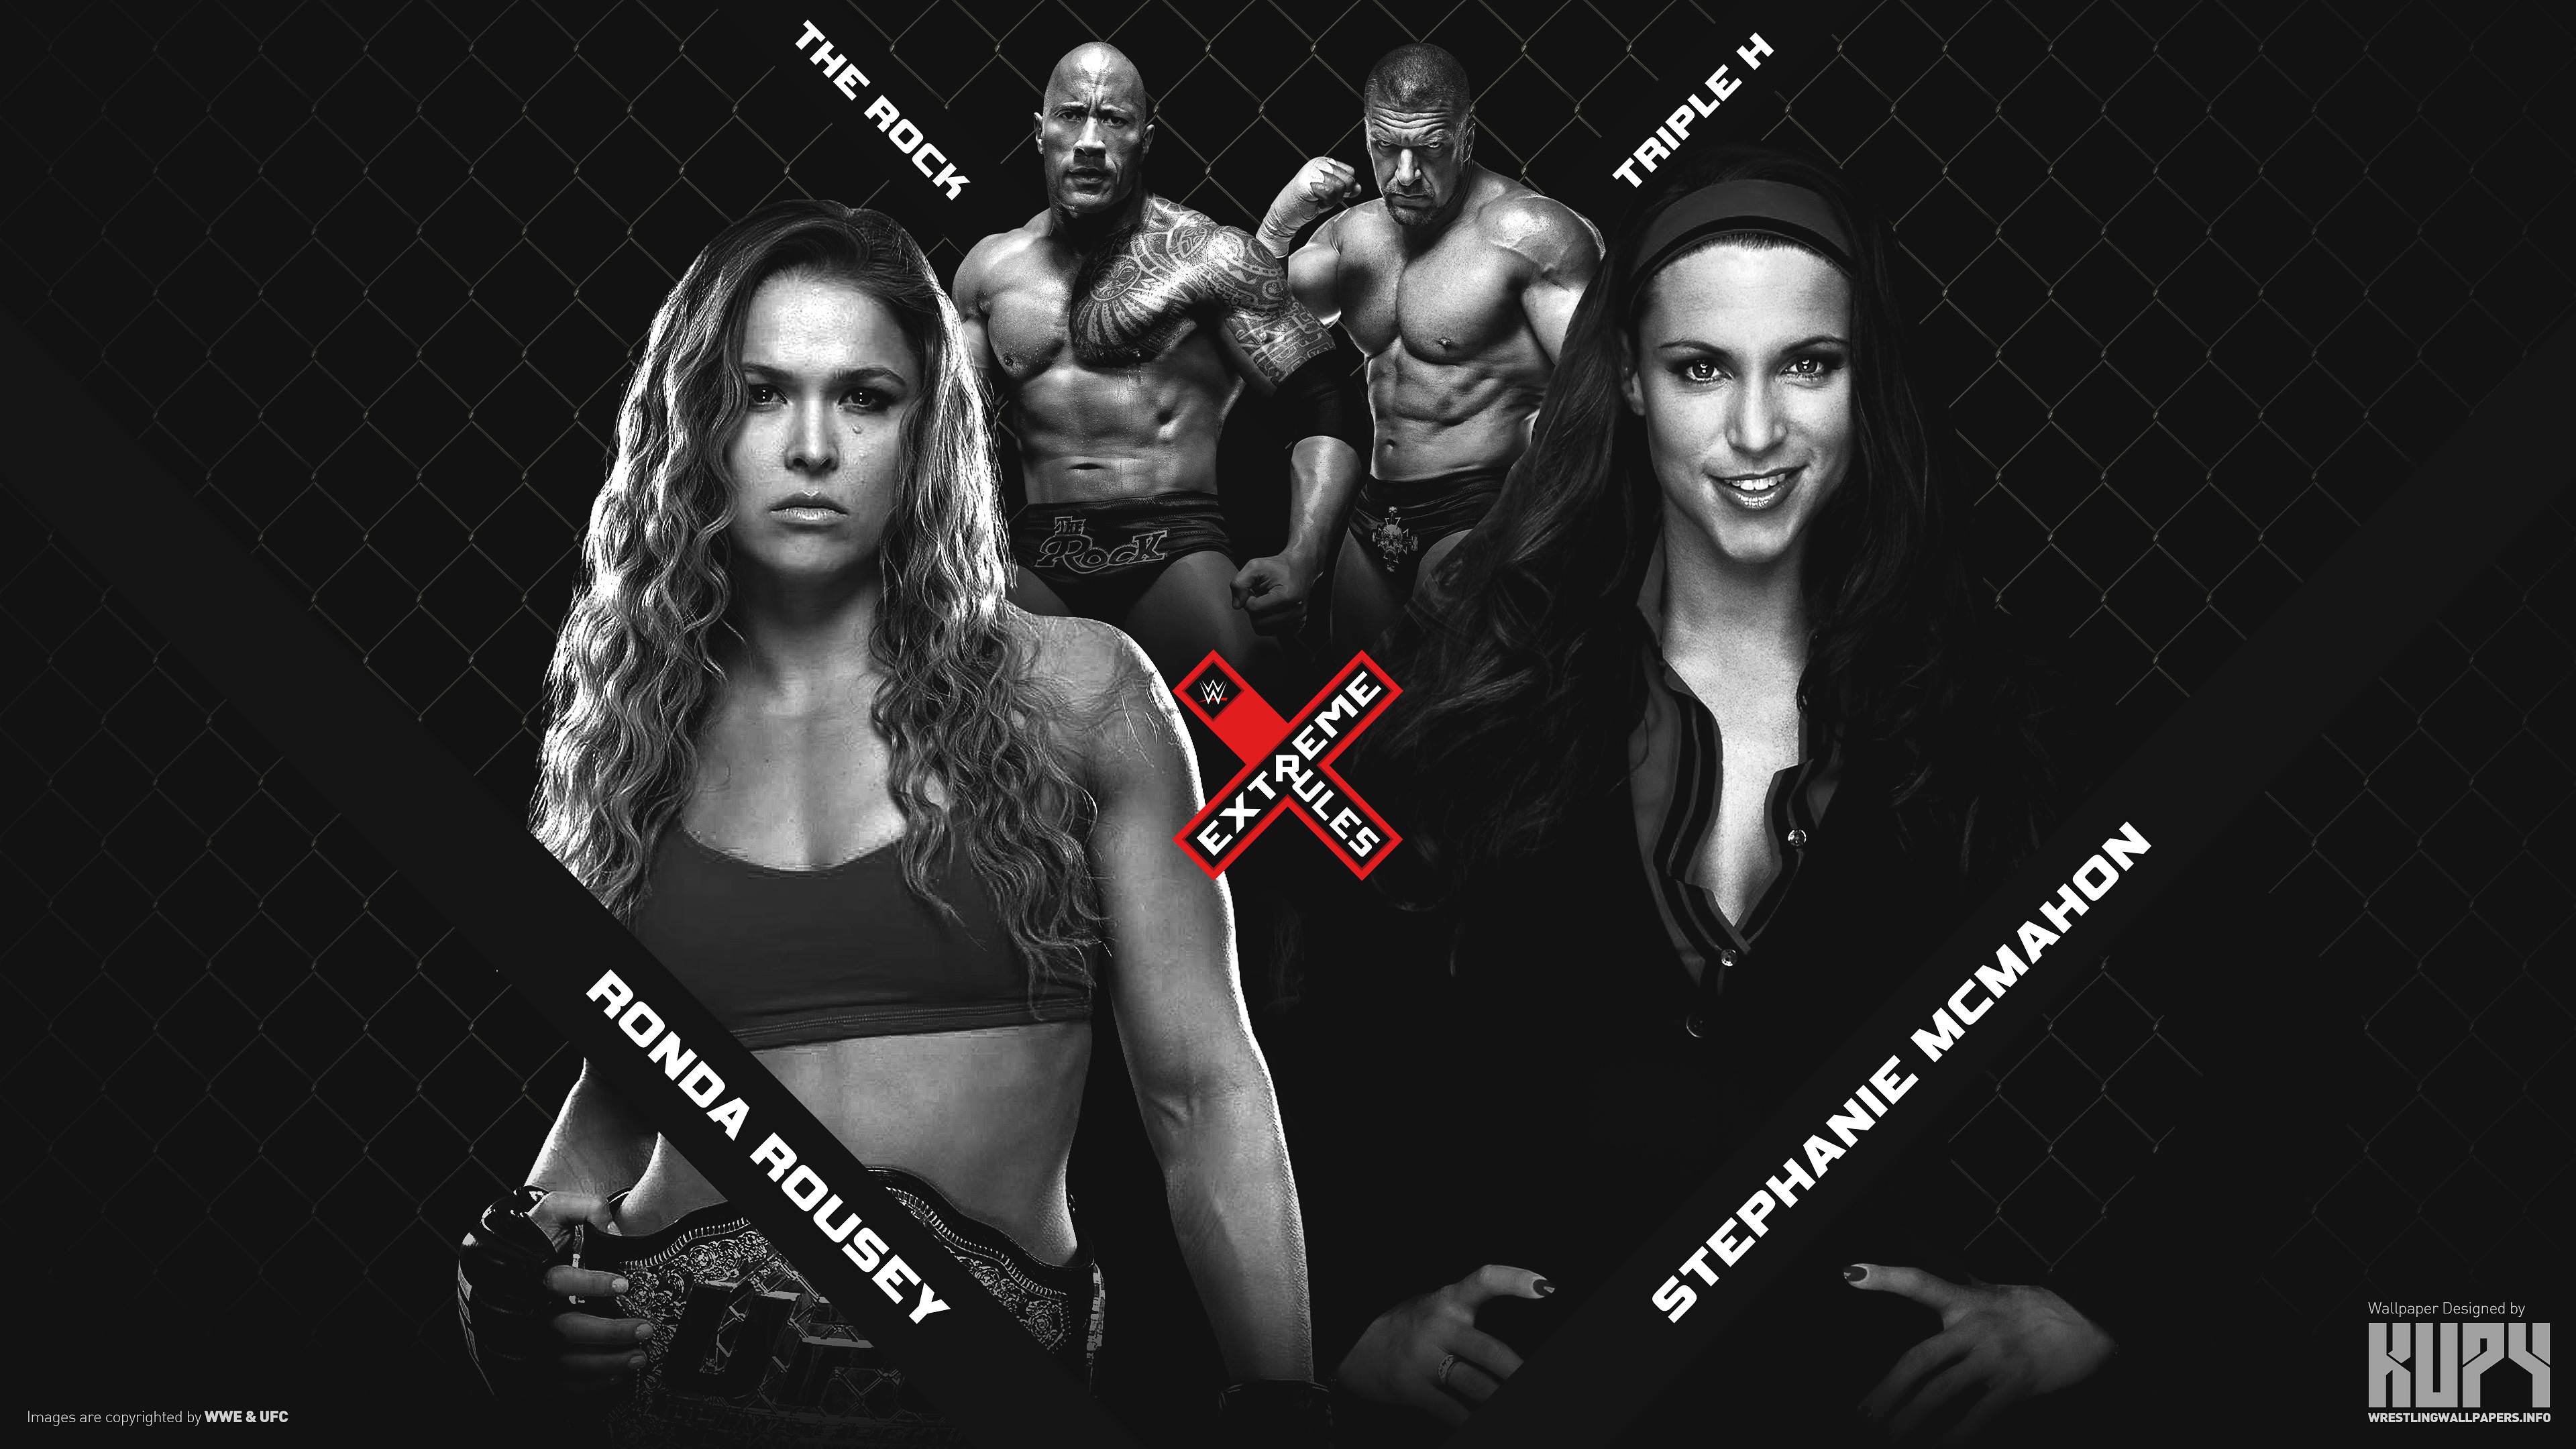 NEW Extreme Rules Mixed Tag Steel Cage Match: The Rock & Ronda